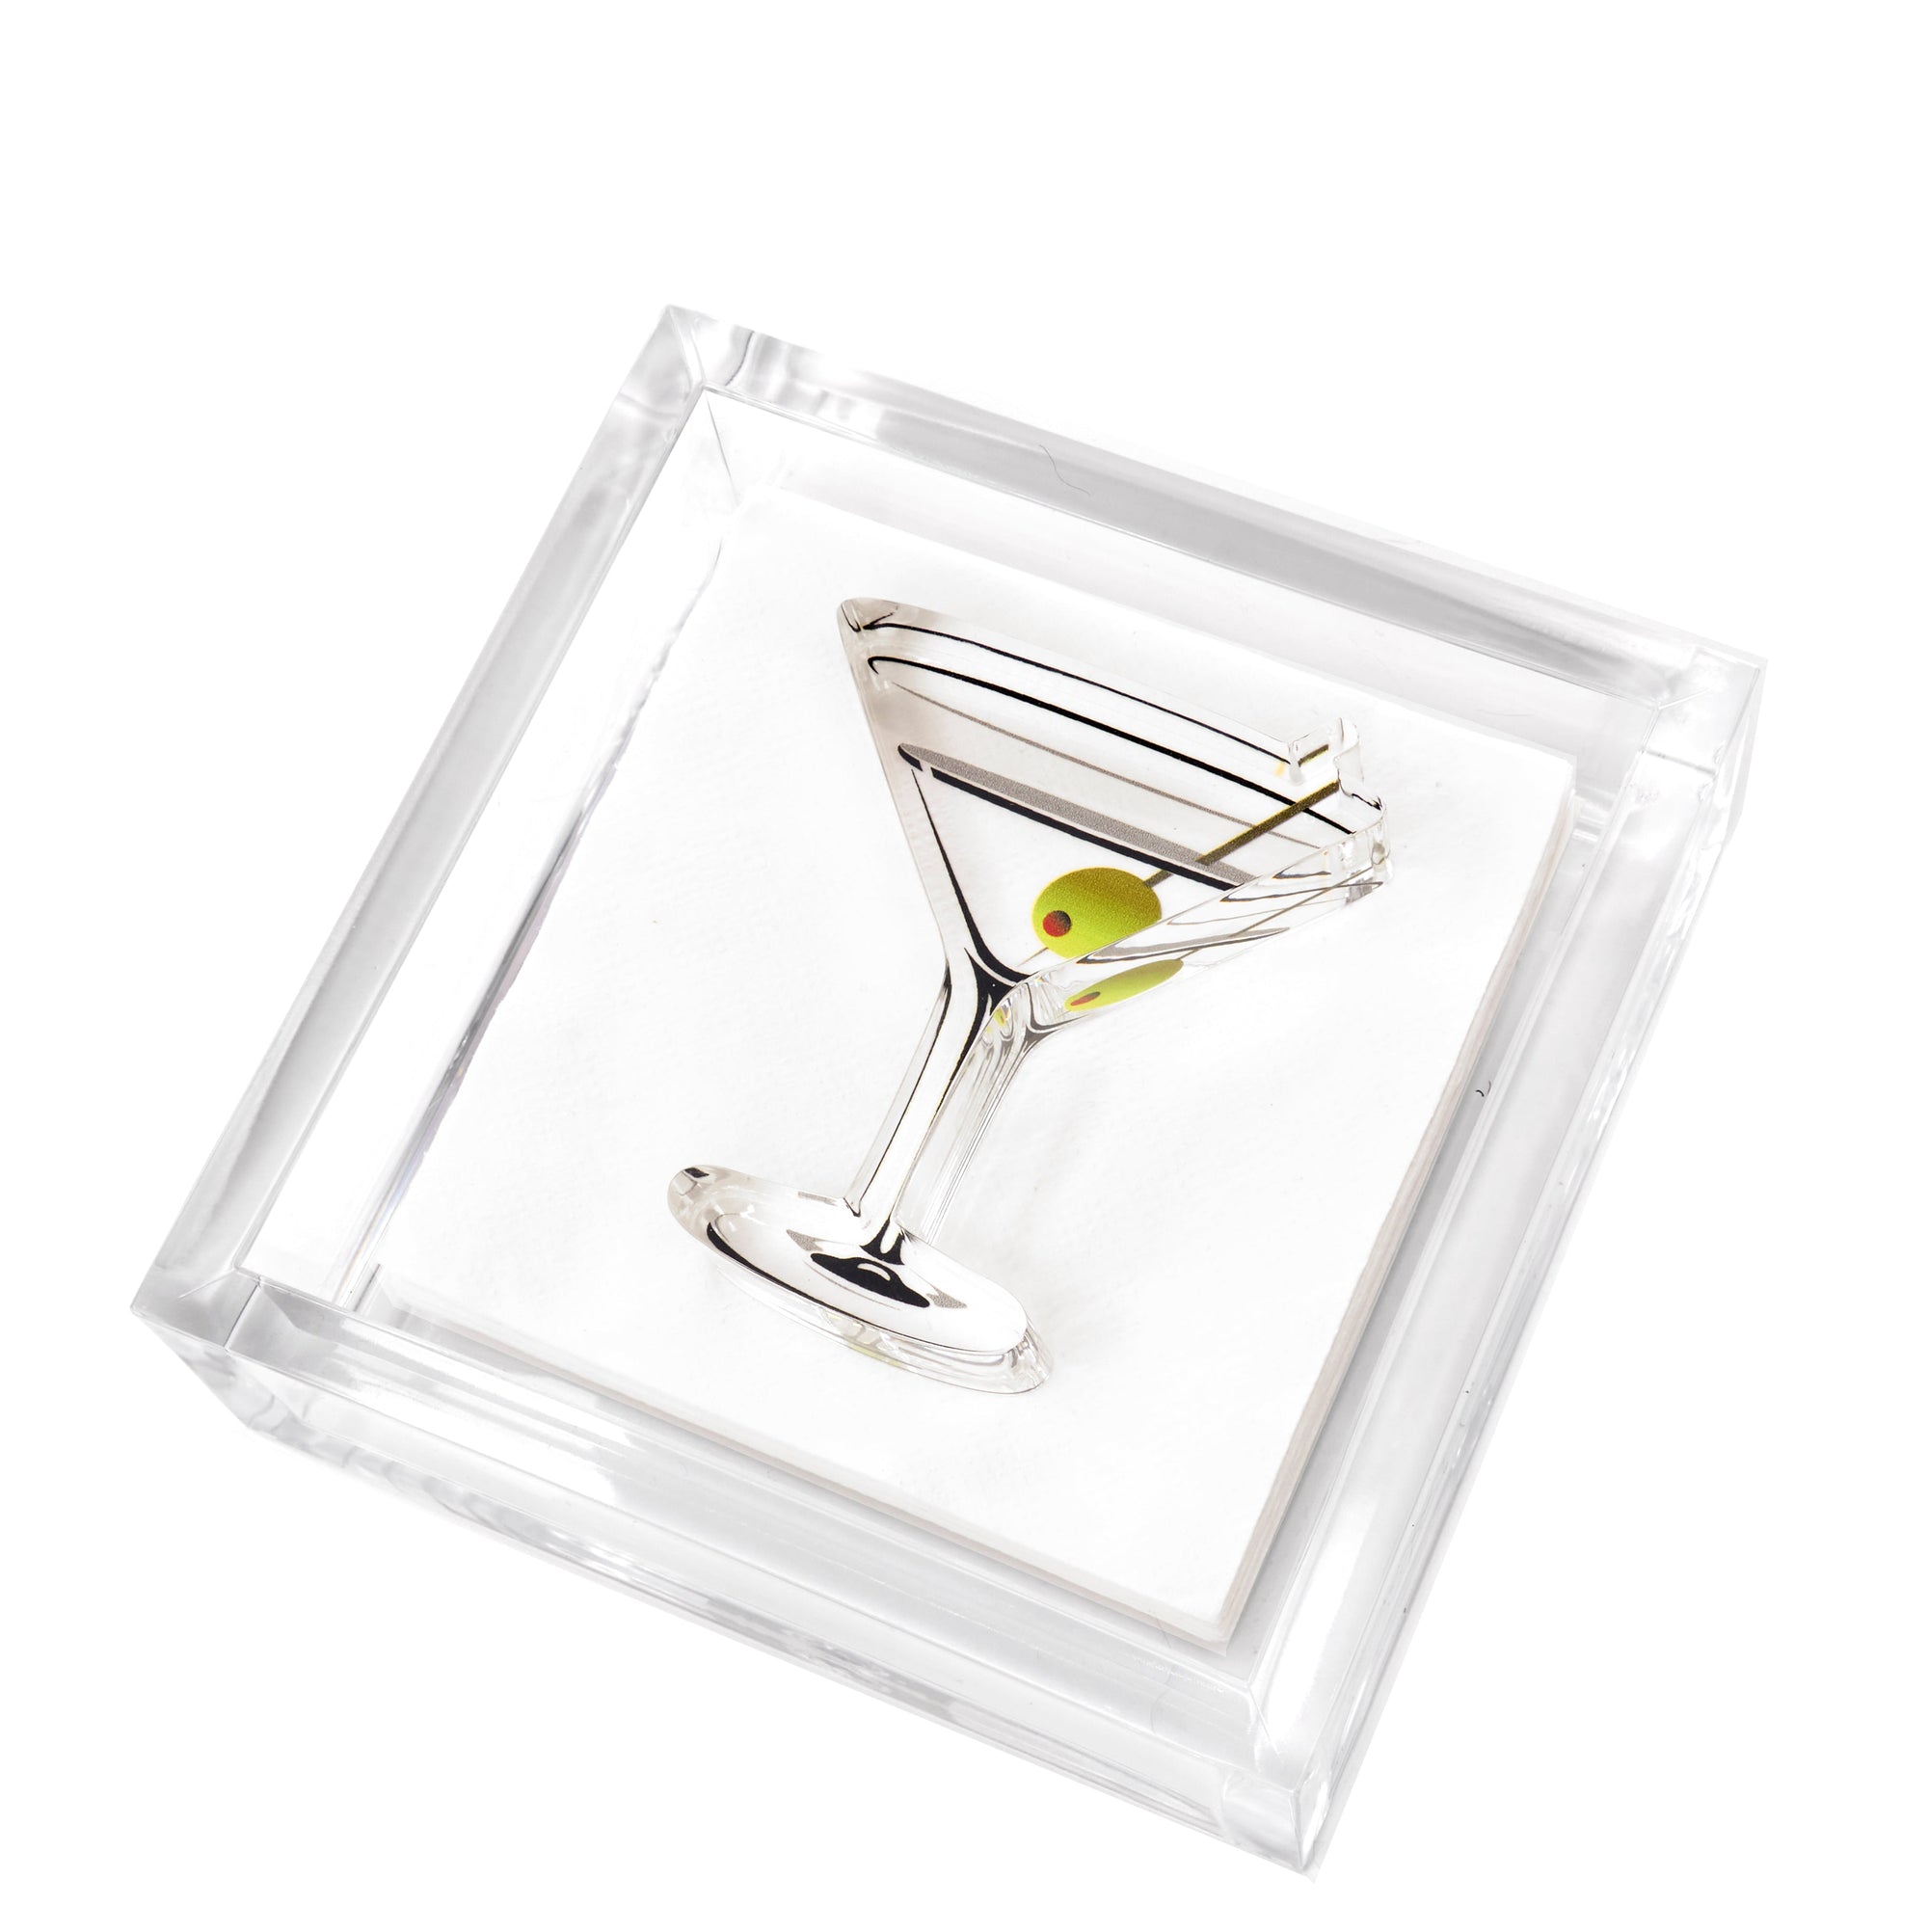 Cocktail Napkin Holder MARTINI 4 inches by 4 inches 